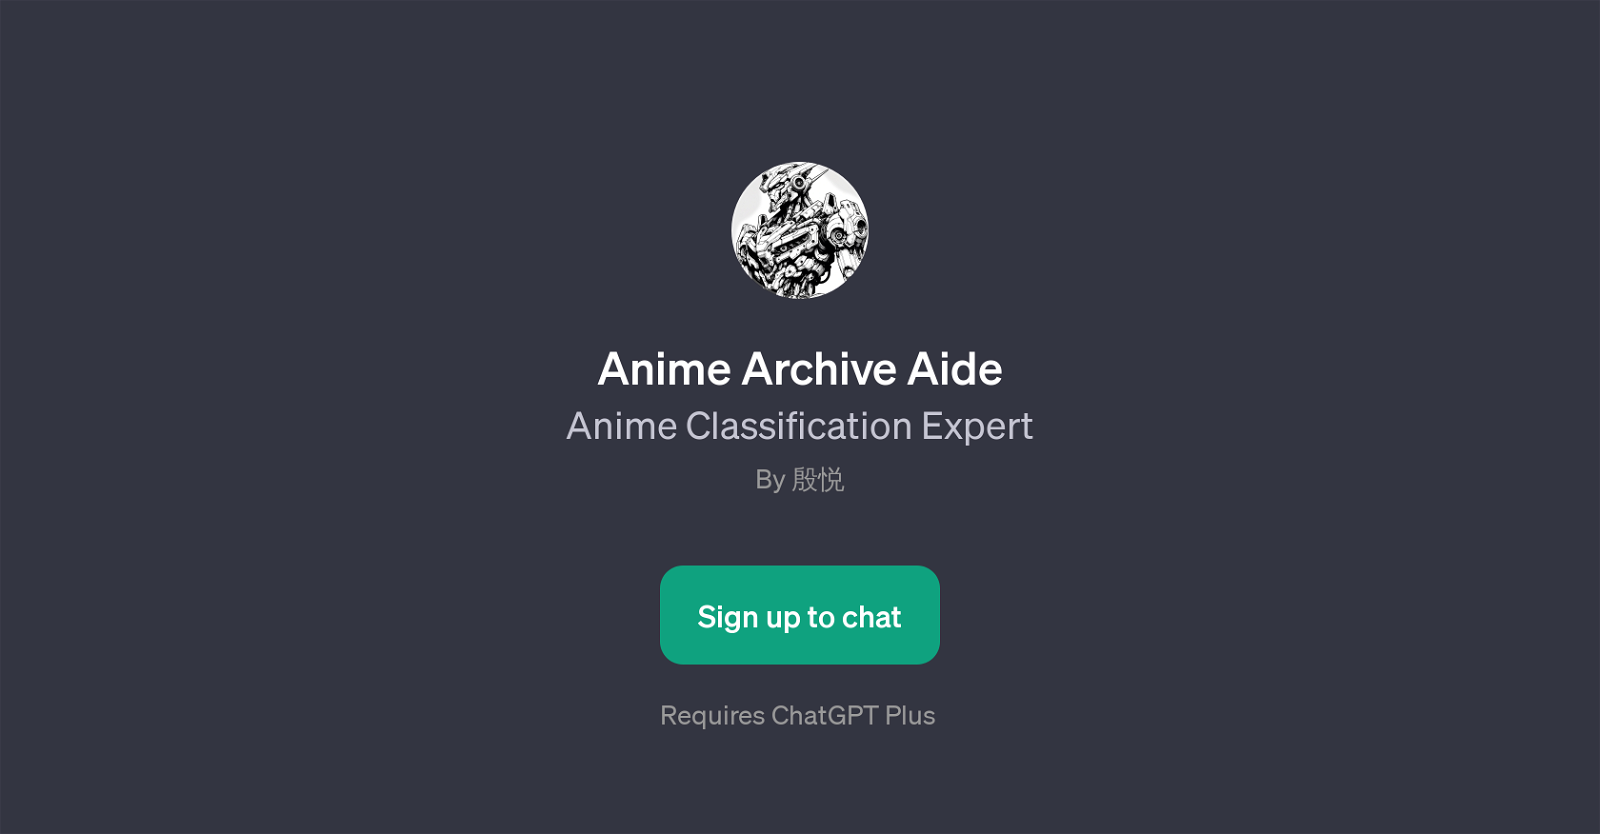 Anime Archive Aide website